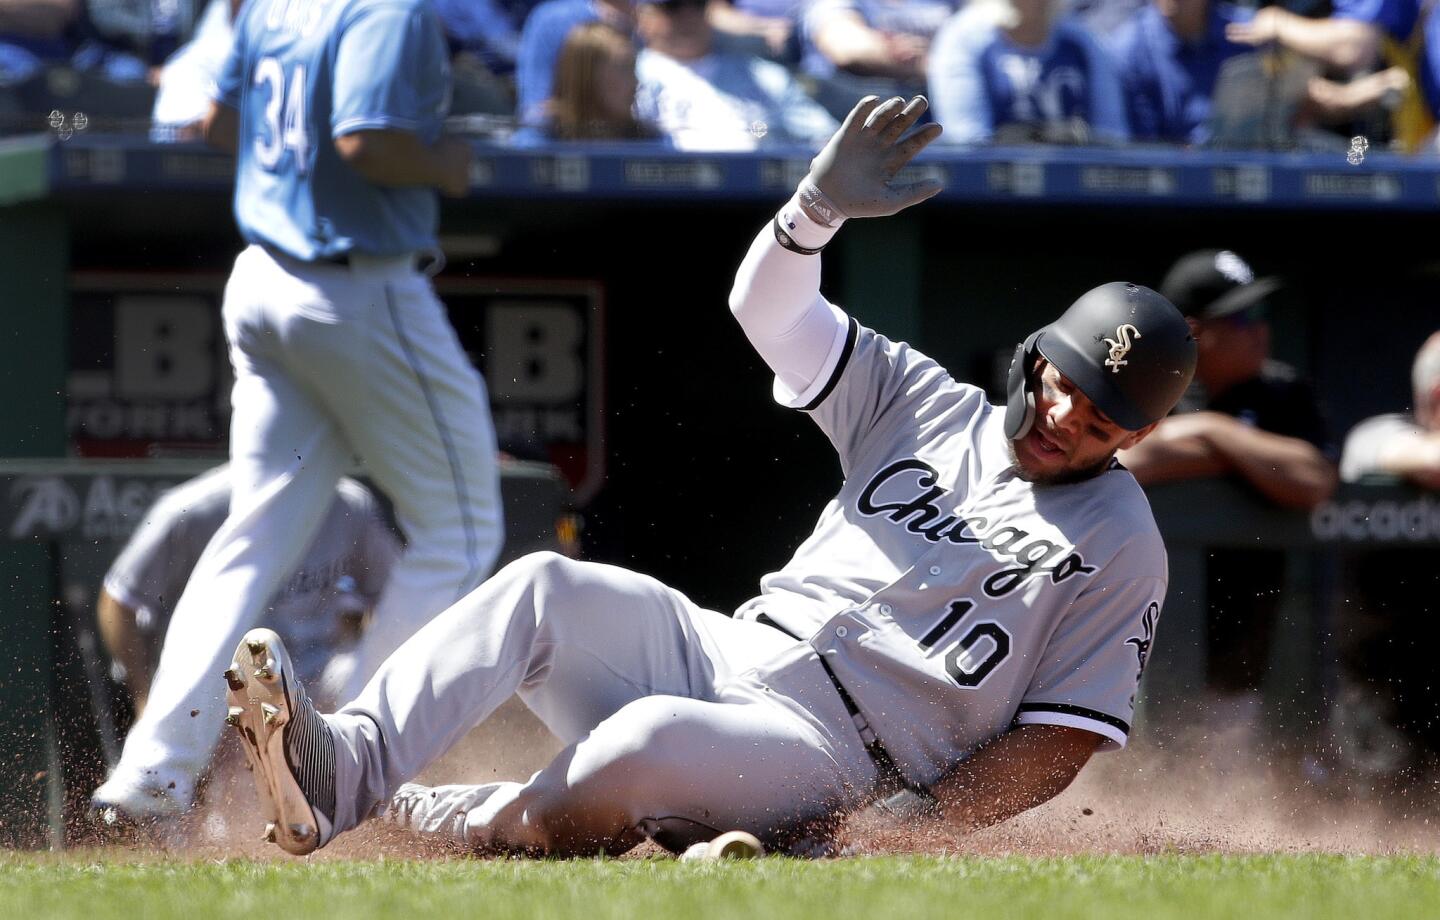 The White Sox's Yoan Moncada slides home to score on a double by Yolmer Sanchez during the fourth inning against the Royals Saturday, April 28, 2018, in Kansas City, Mo.